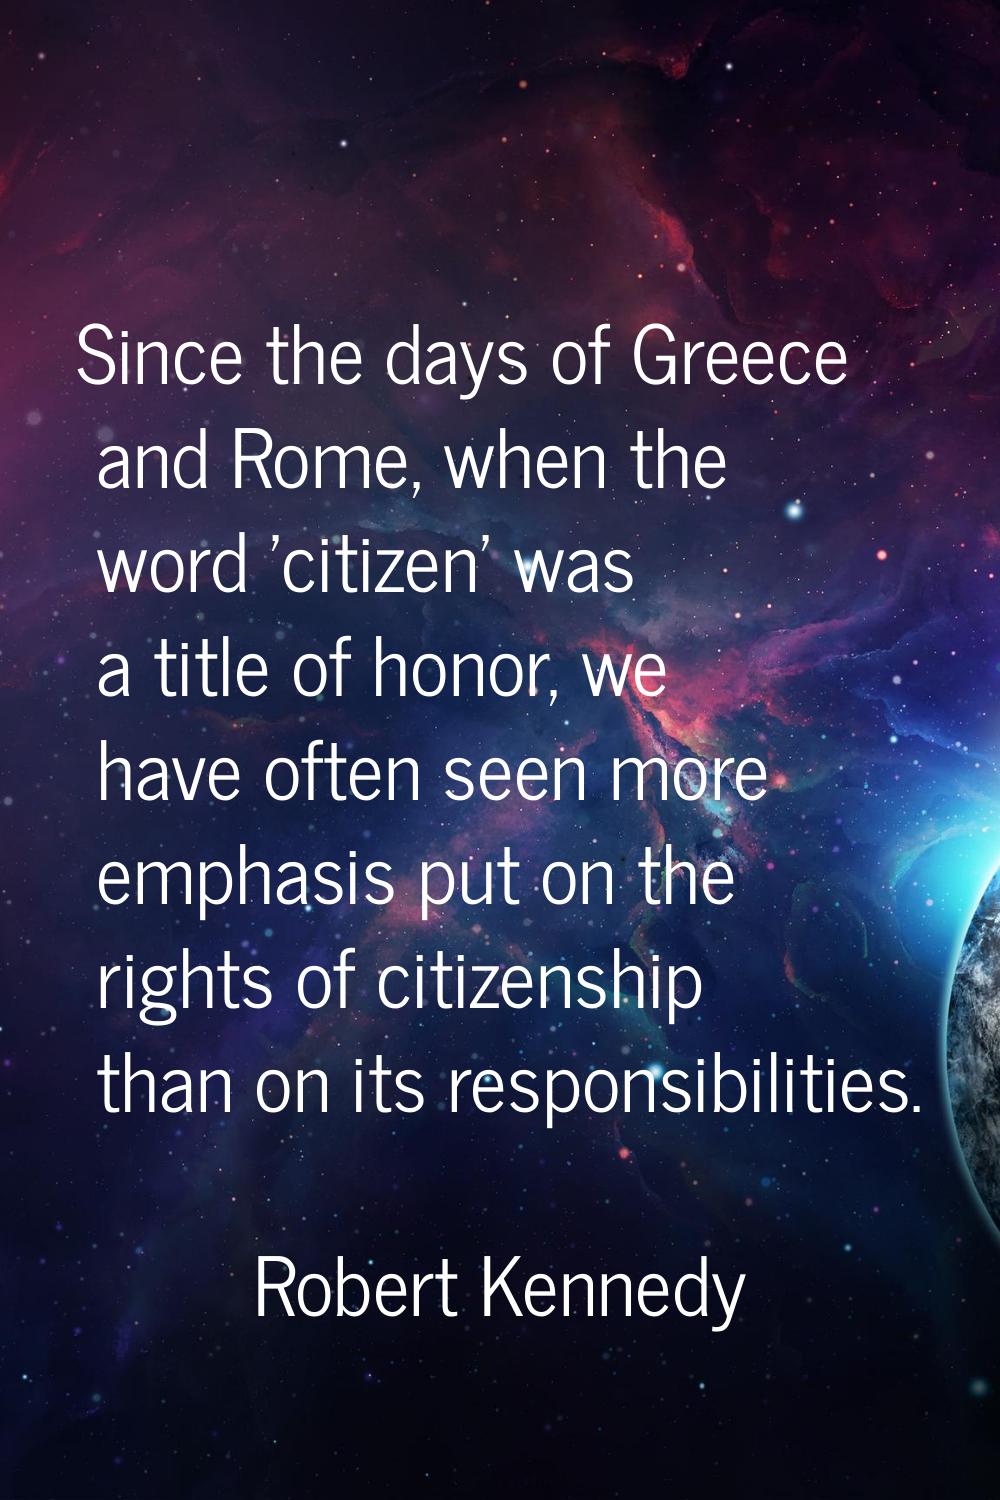 Since the days of Greece and Rome, when the word 'citizen' was a title of honor, we have often seen